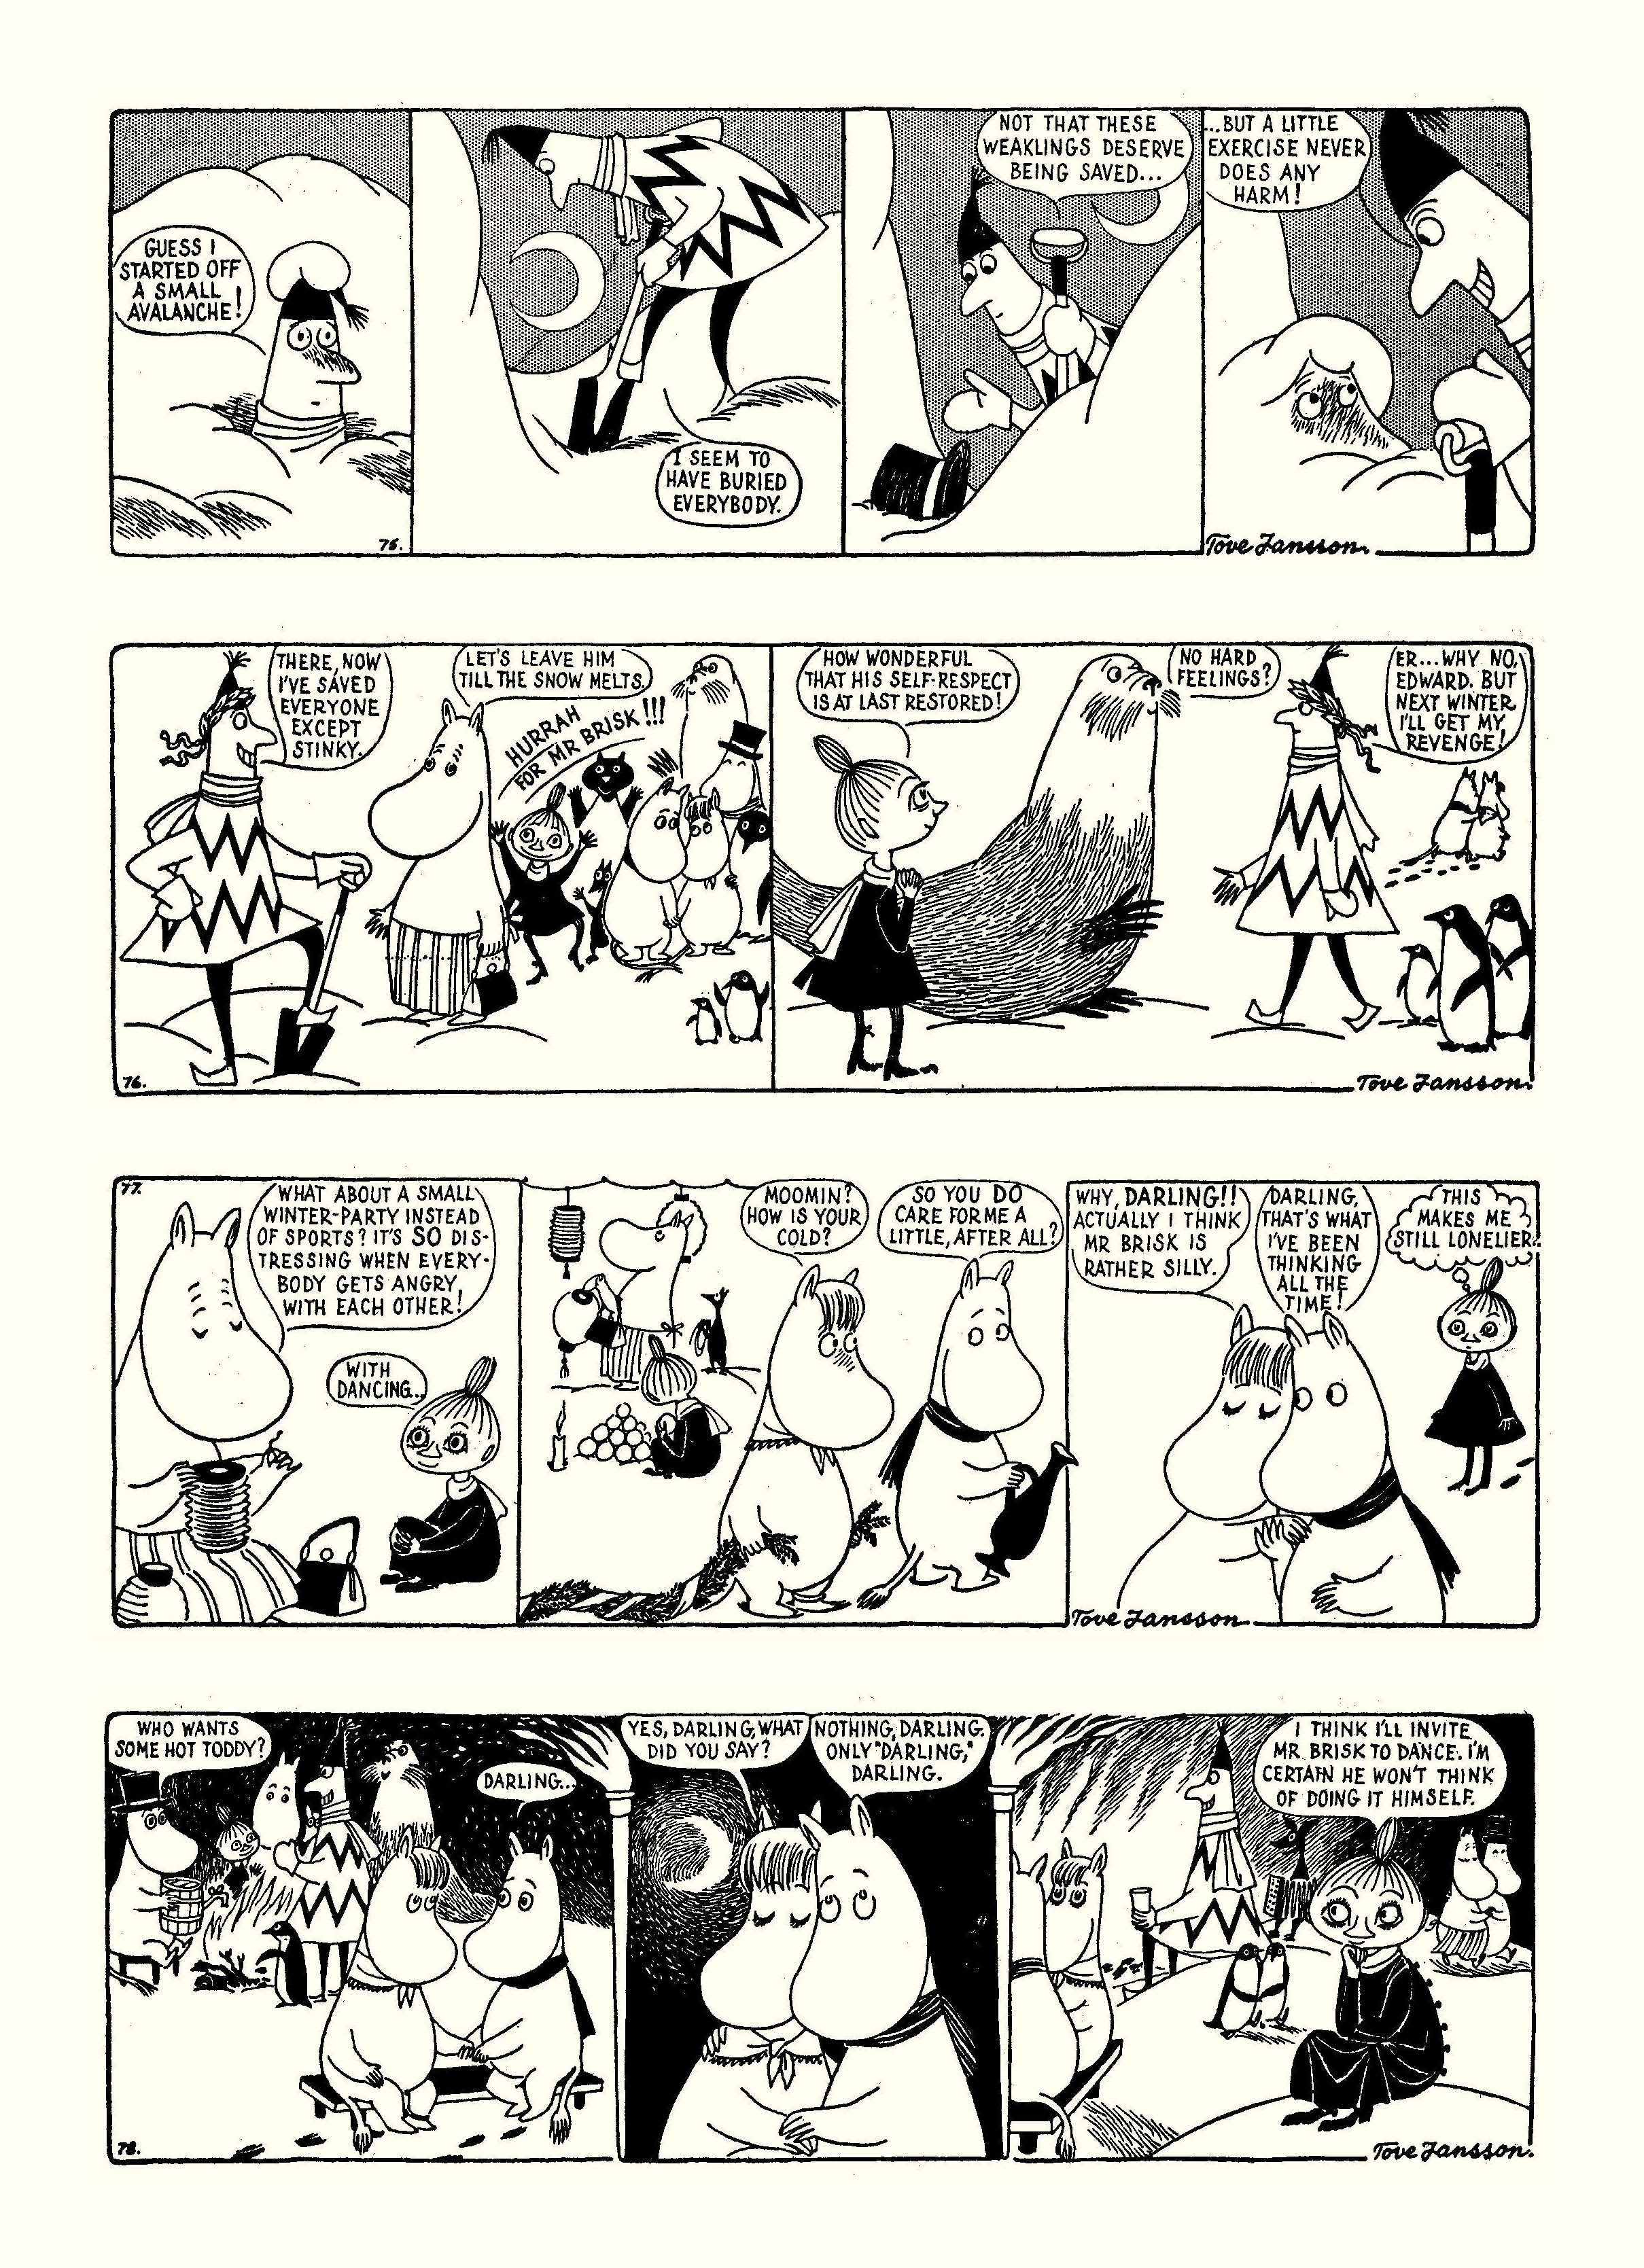 Read online Moomin: The Complete Tove Jansson Comic Strip comic -  Issue # TPB 2 - 25